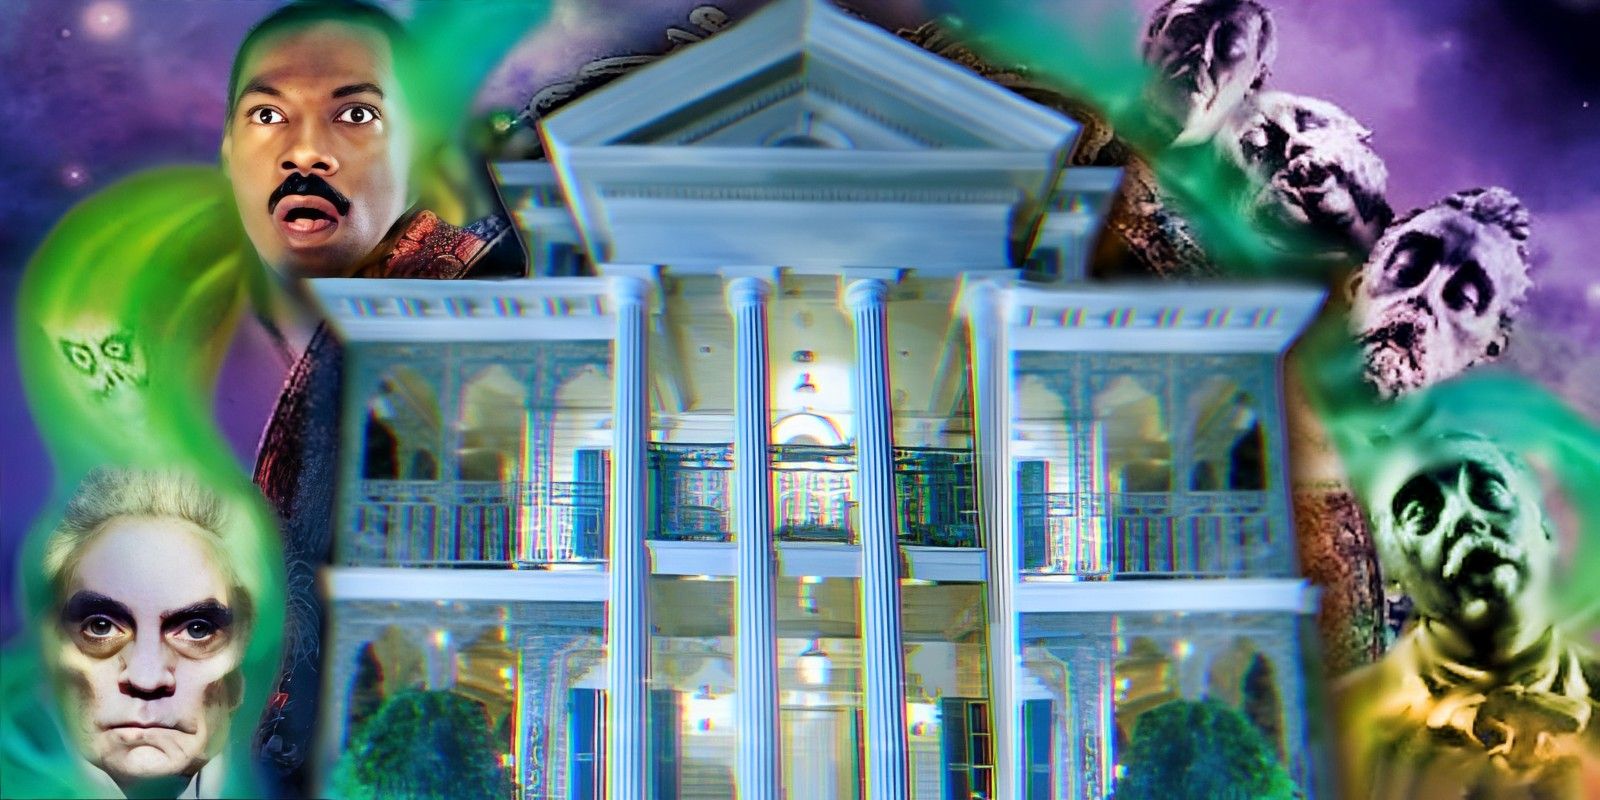 The Disneyland Haunted Mansion in front of the 2003 Haunted Mansion poster.